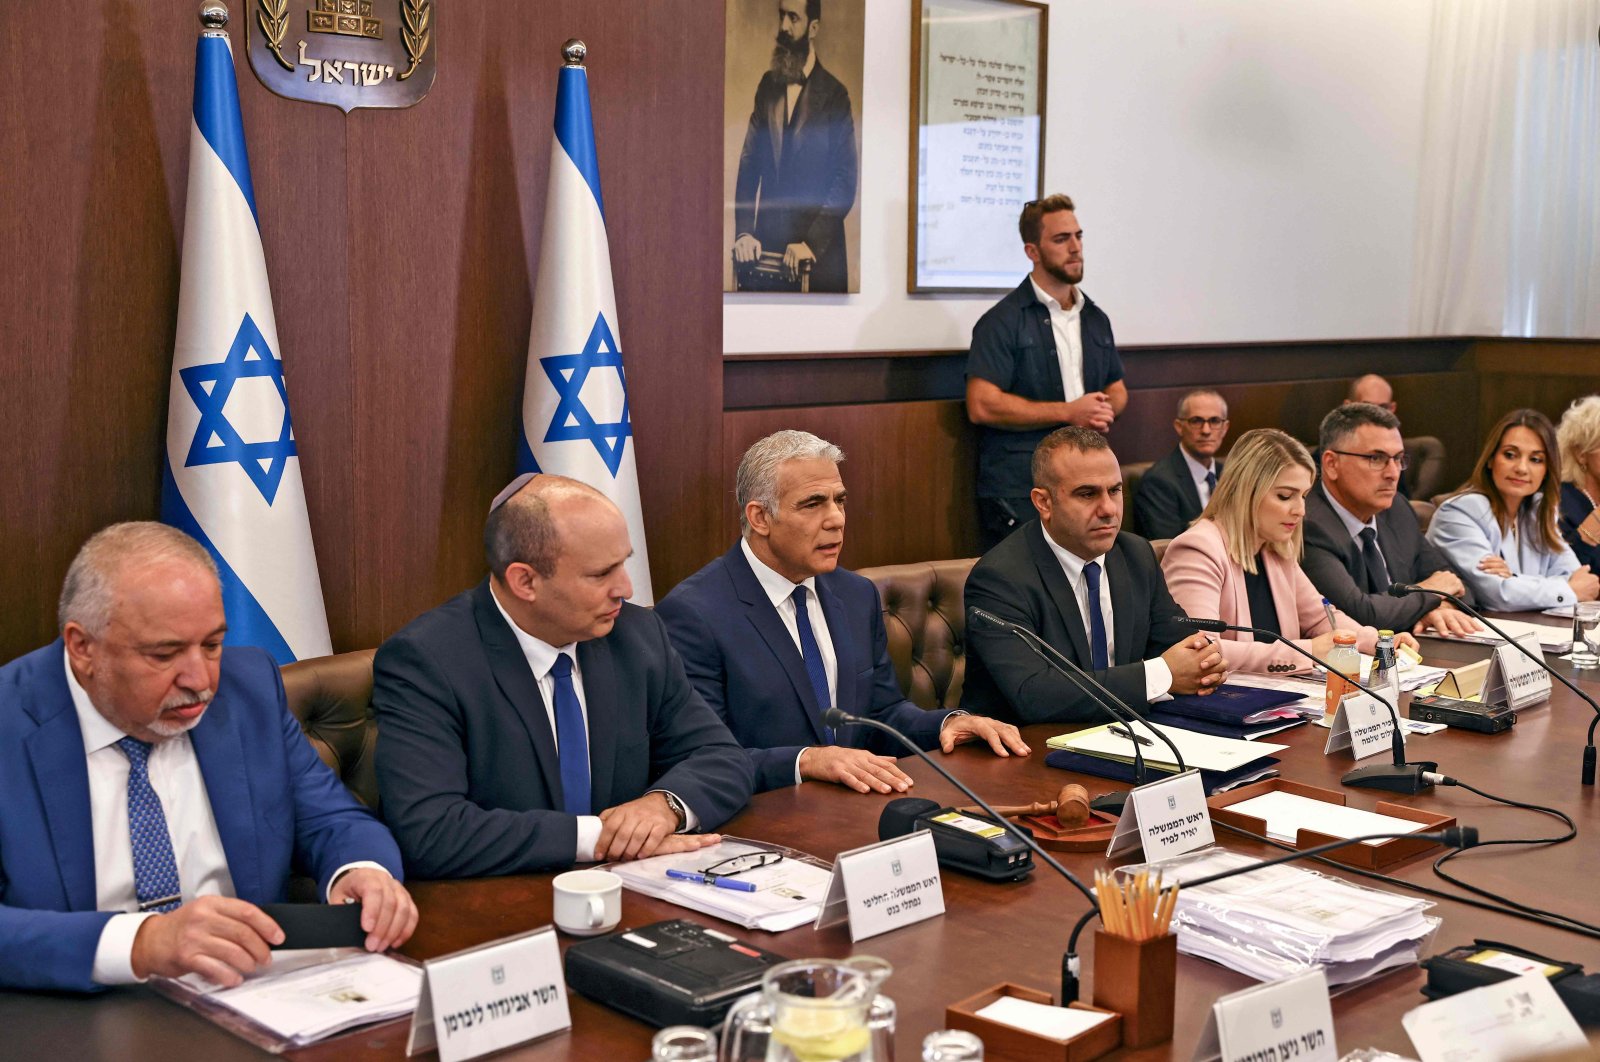 Israeli Prime Minister Yair Lapid (C) chairs a special Cabinet meeting to approve the U.S.-brokered deal setting a maritime border between Israel and Lebanon, at the prime minister&#039;s office in West Jerusalem on Oct. 27, 2022, accompanied by former prime minister Naftali Bennett (2nd-L), Finance Minister Avigdor Liberman (L), Justice Minister Gideon Saar (2nd-R), and other Cabinet officials. (AFP Photo)